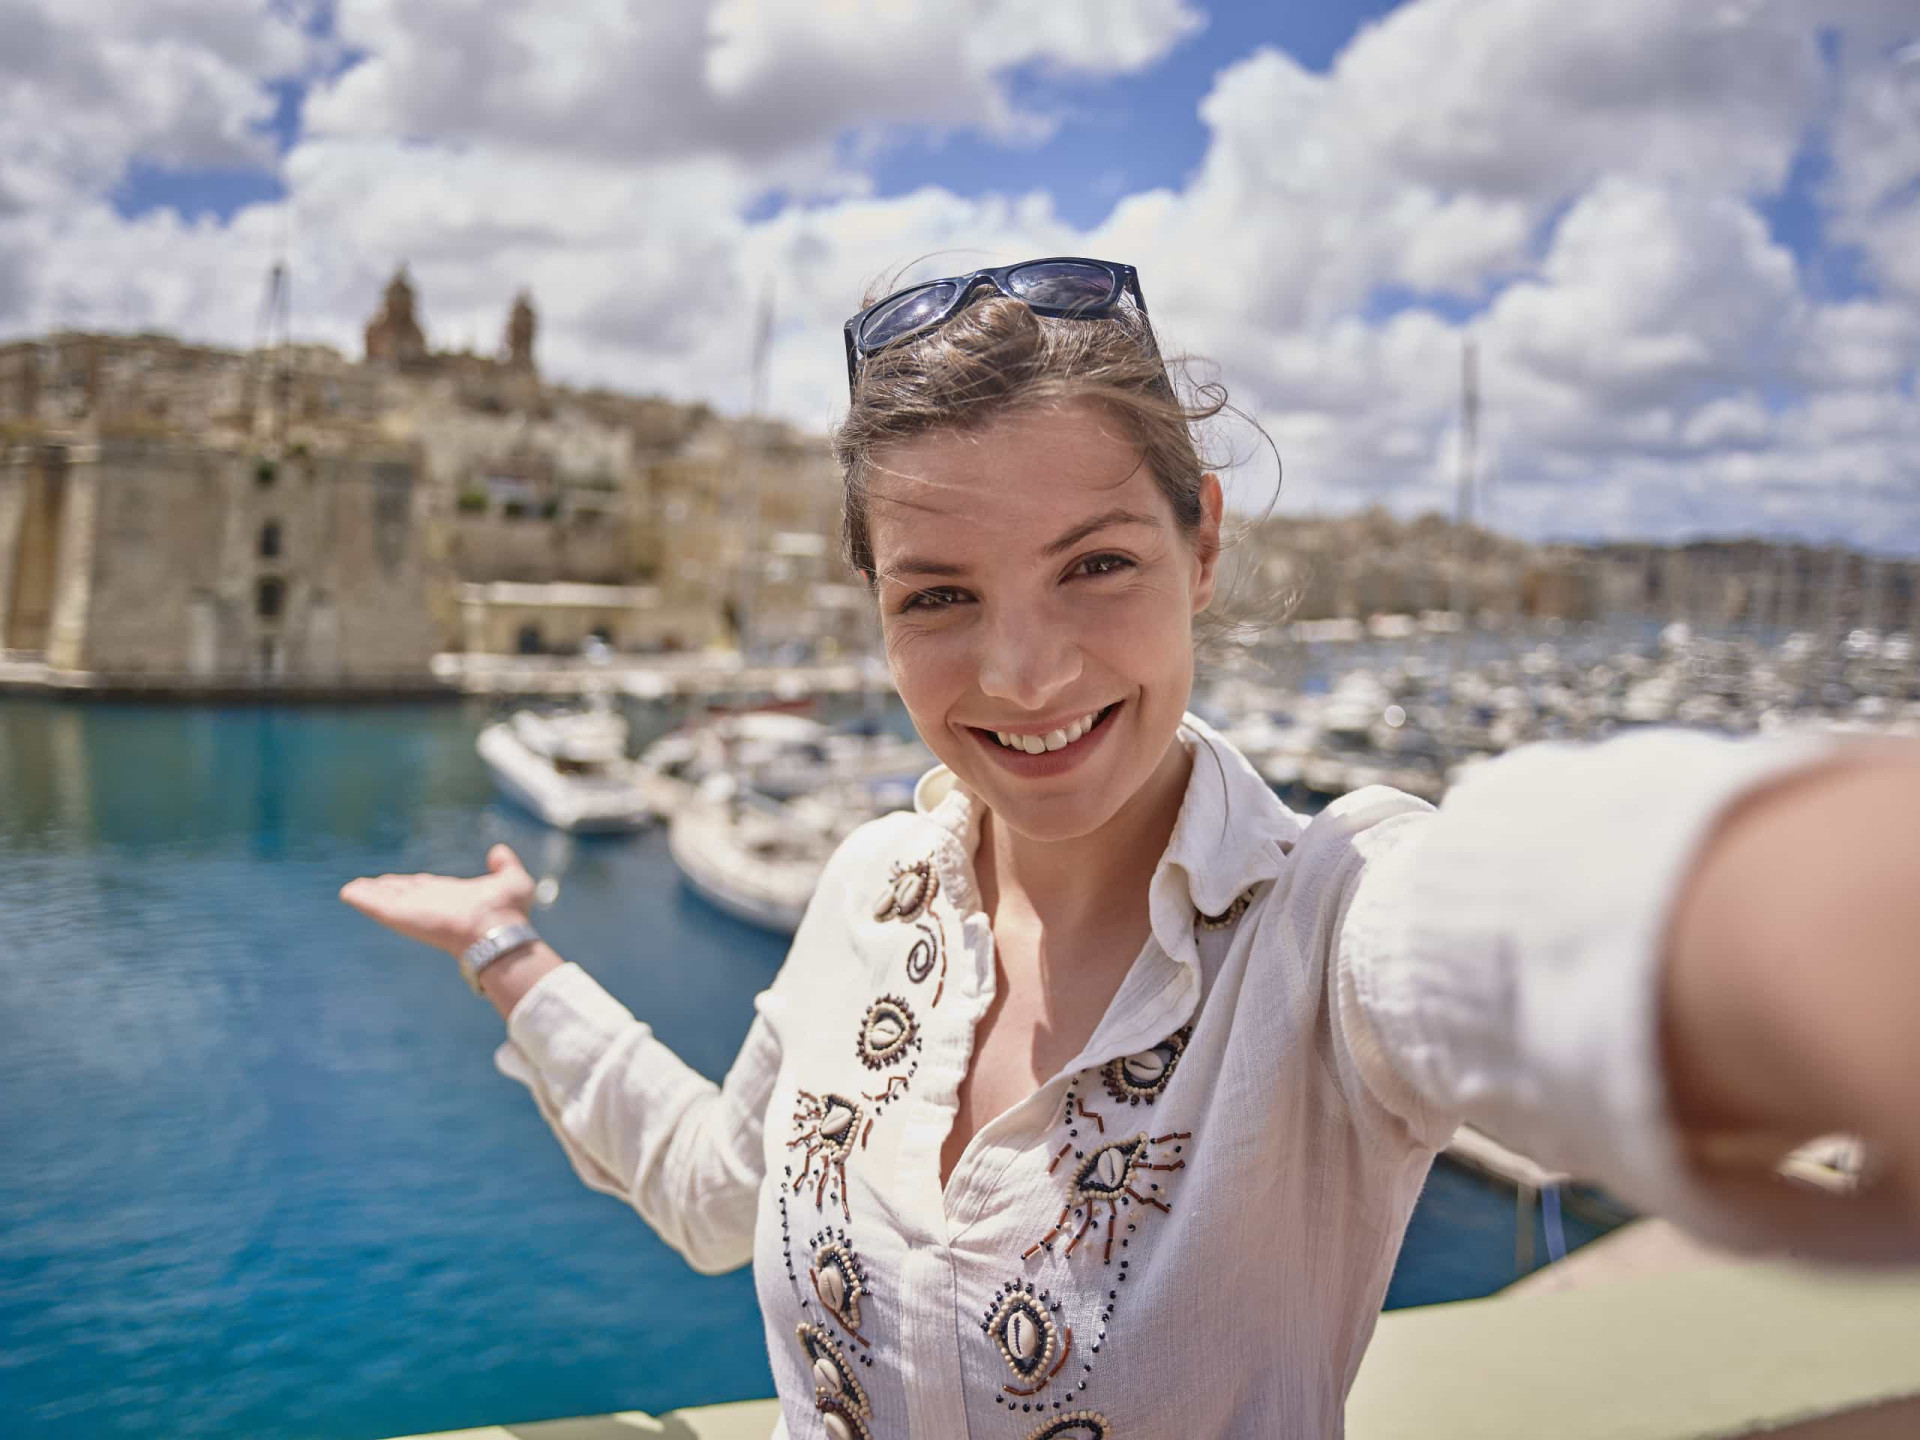 The Maltese are well-known for their hospitality, friendliness, and generosity. It's often said that the people go out of their way to make guests feel at home or to lend a helping hand.<p><a href="https://www.msn.com/en-us/community/channel/vid-7xx8mnucu55yw63we9va2gwr7uihbxwc68fxqp25x6tg4ftibpra?cvid=94631541bc0f4f89bfd59158d696ad7e">Follow us and access great exclusive content every day</a></p>